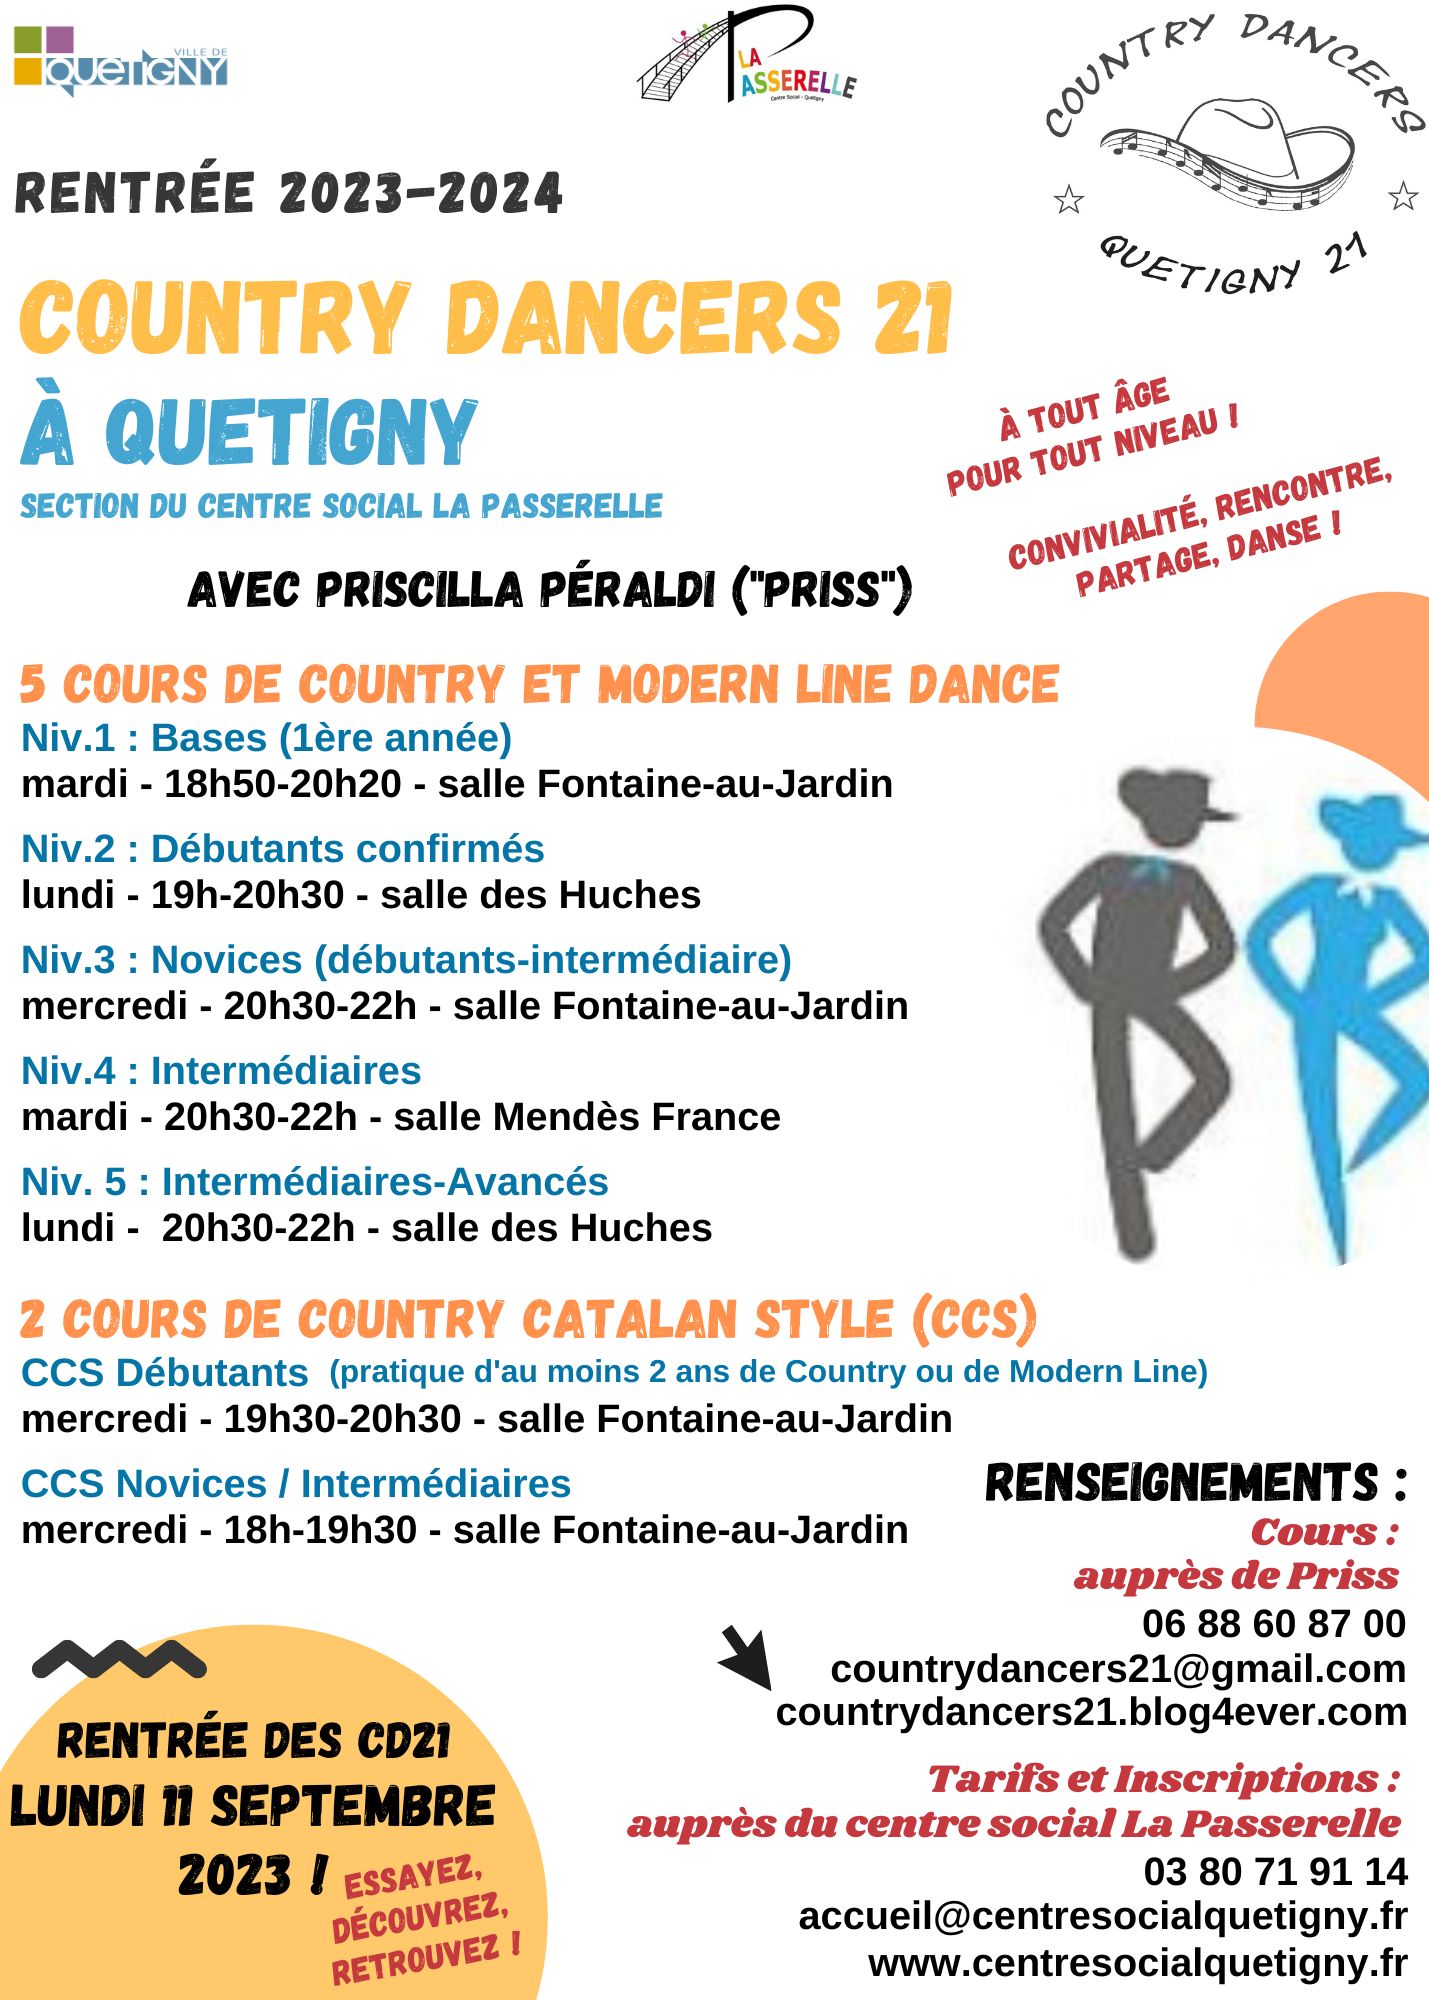 Affiche Cours Country Dancers 21 2023-2024